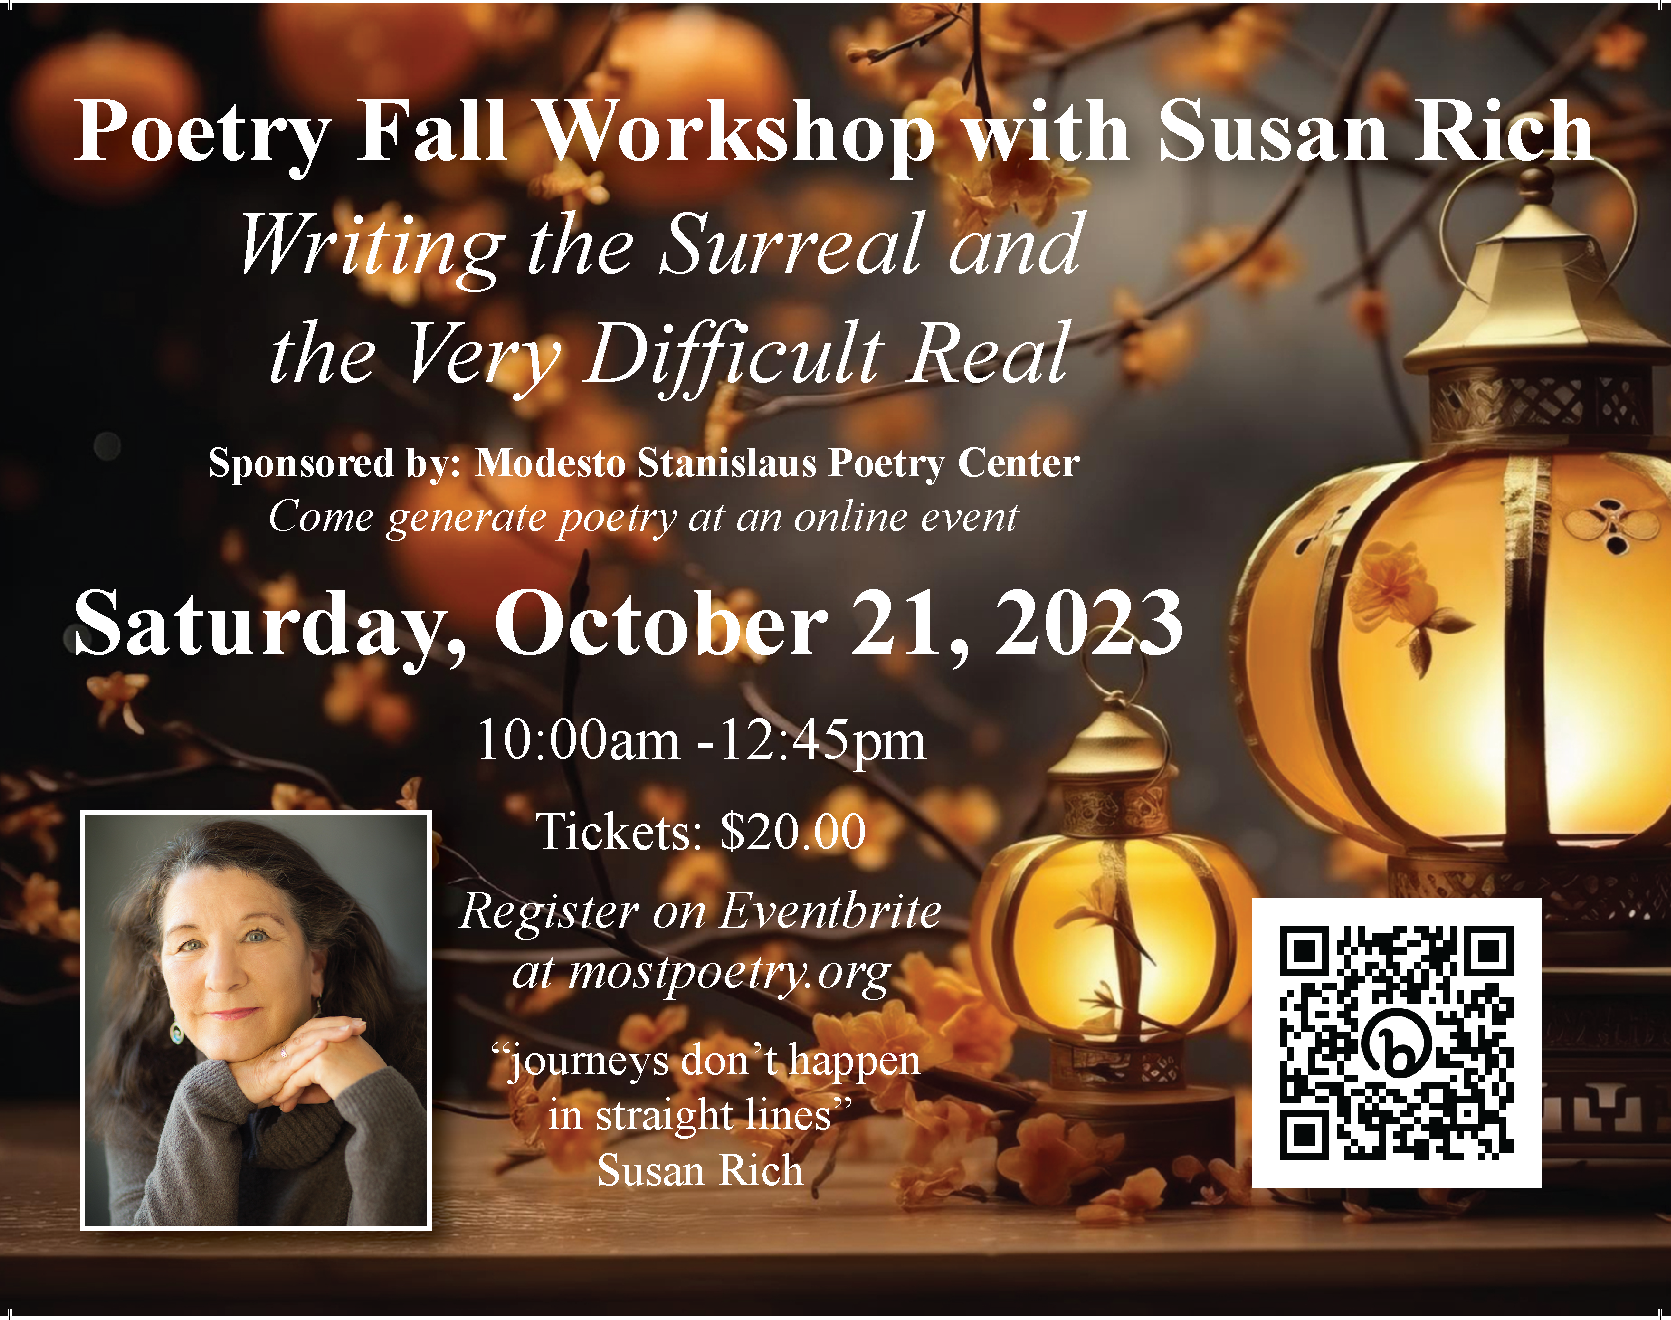 Poetry Fall Workshop with Susan Rich: Writing the Surreal and the Very Difficult Real. Sponsored by Modesto-Stanislaus Poetry Center. Saturday October 21, 2023, 10 am - 12:45 pm. Register on Eventbrite at mostpoetry.org